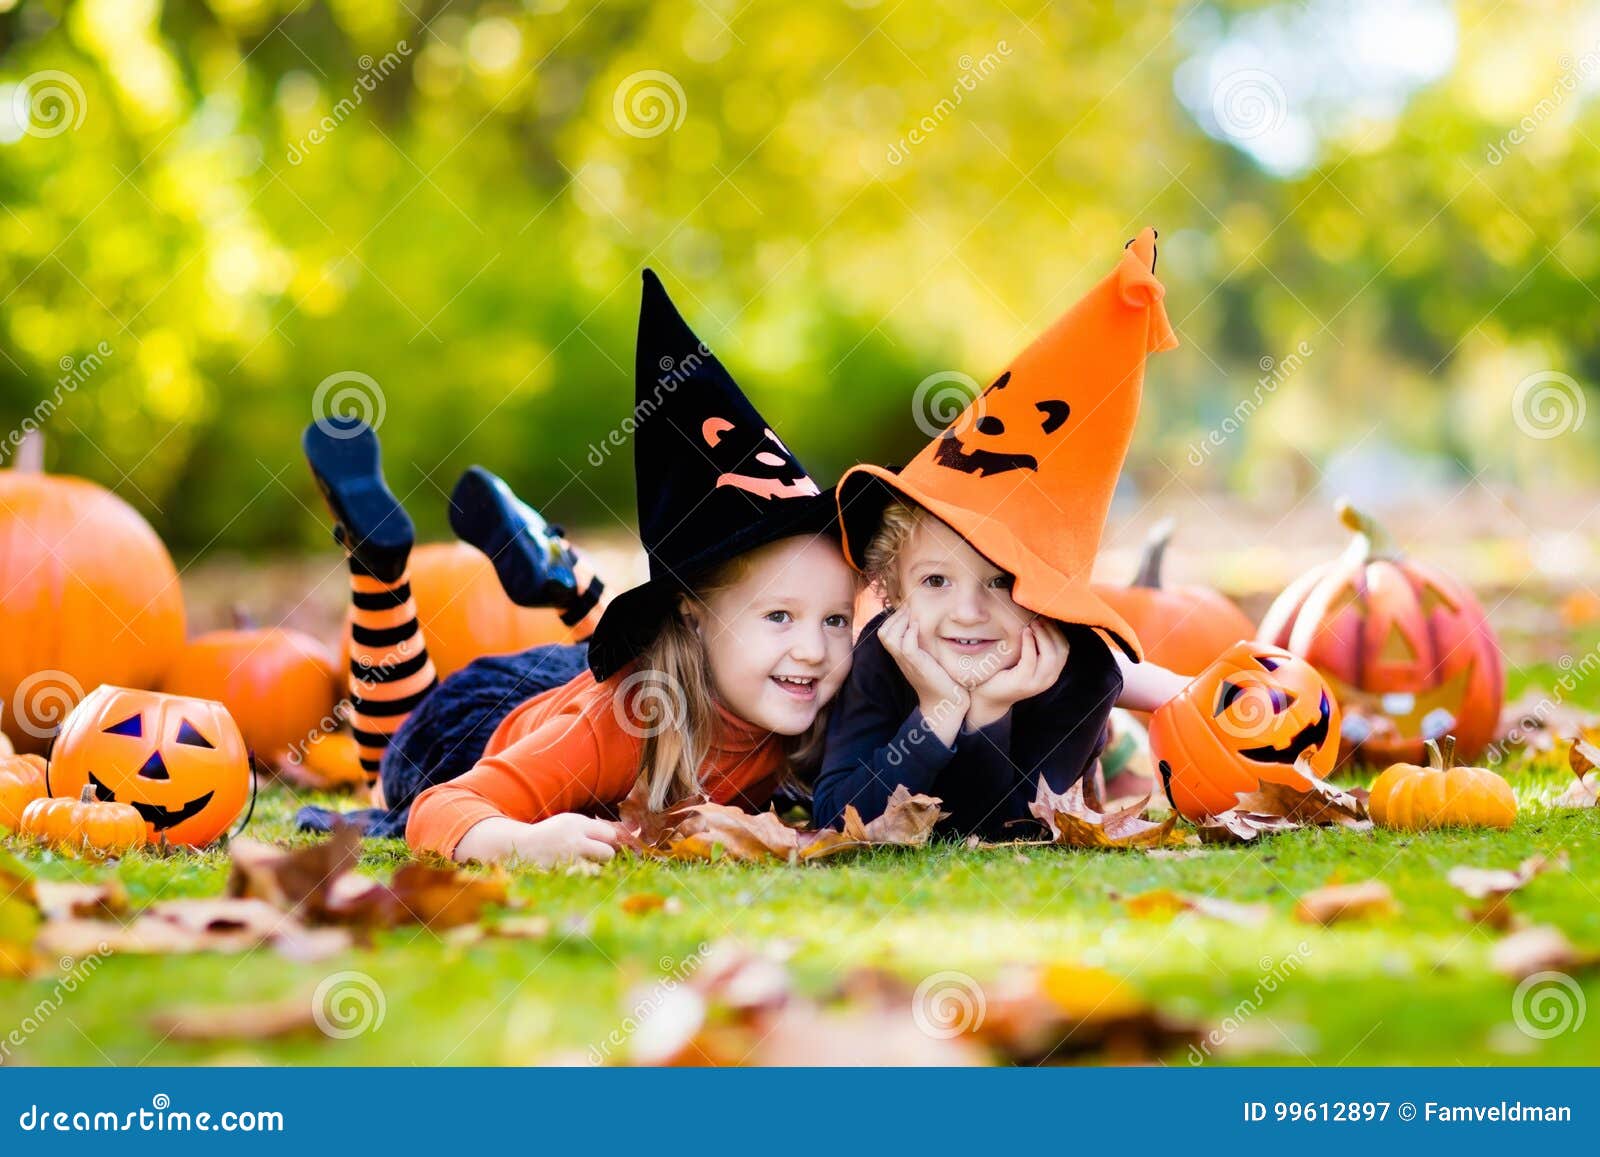 Kids with Pumpkins in Halloween Costumes Stock Image - Image of fall ...